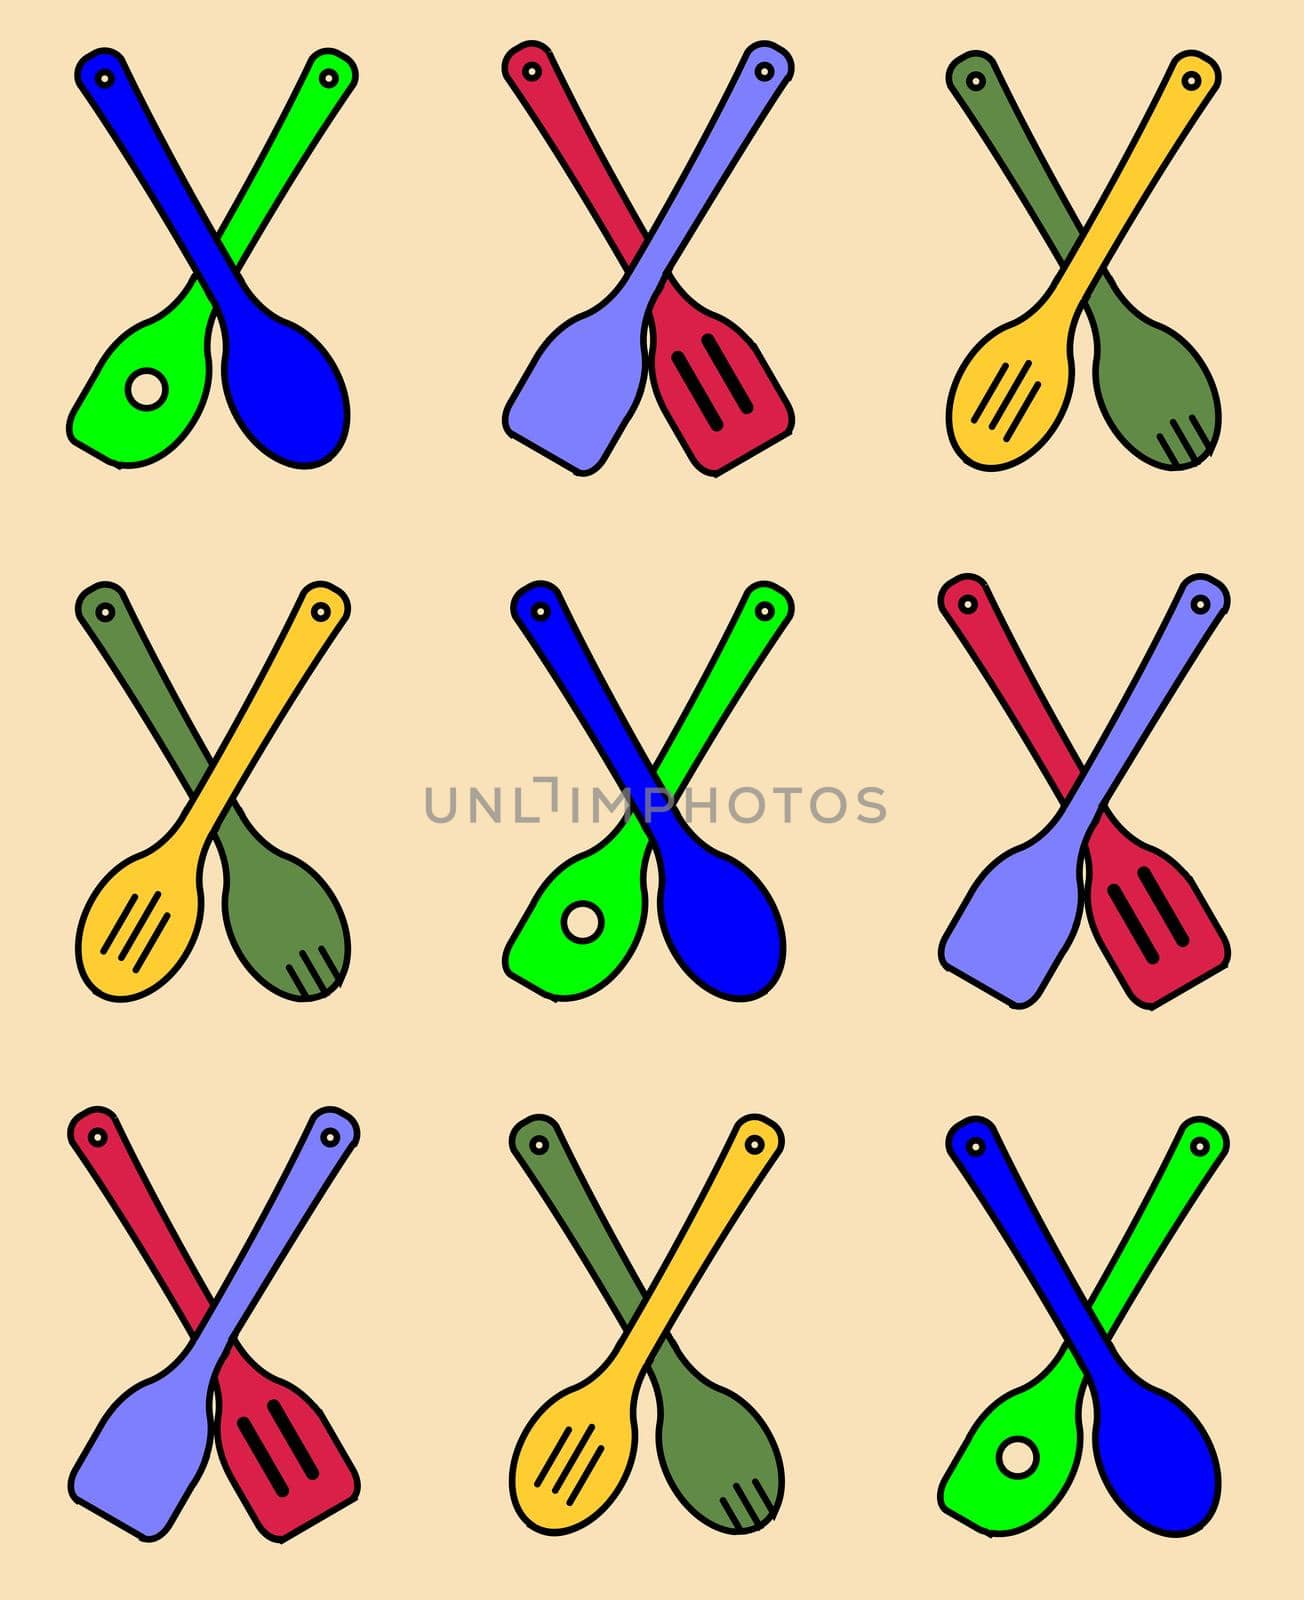 A collection of wooden kitchen tools in a seamless repeating pattern over a pale background